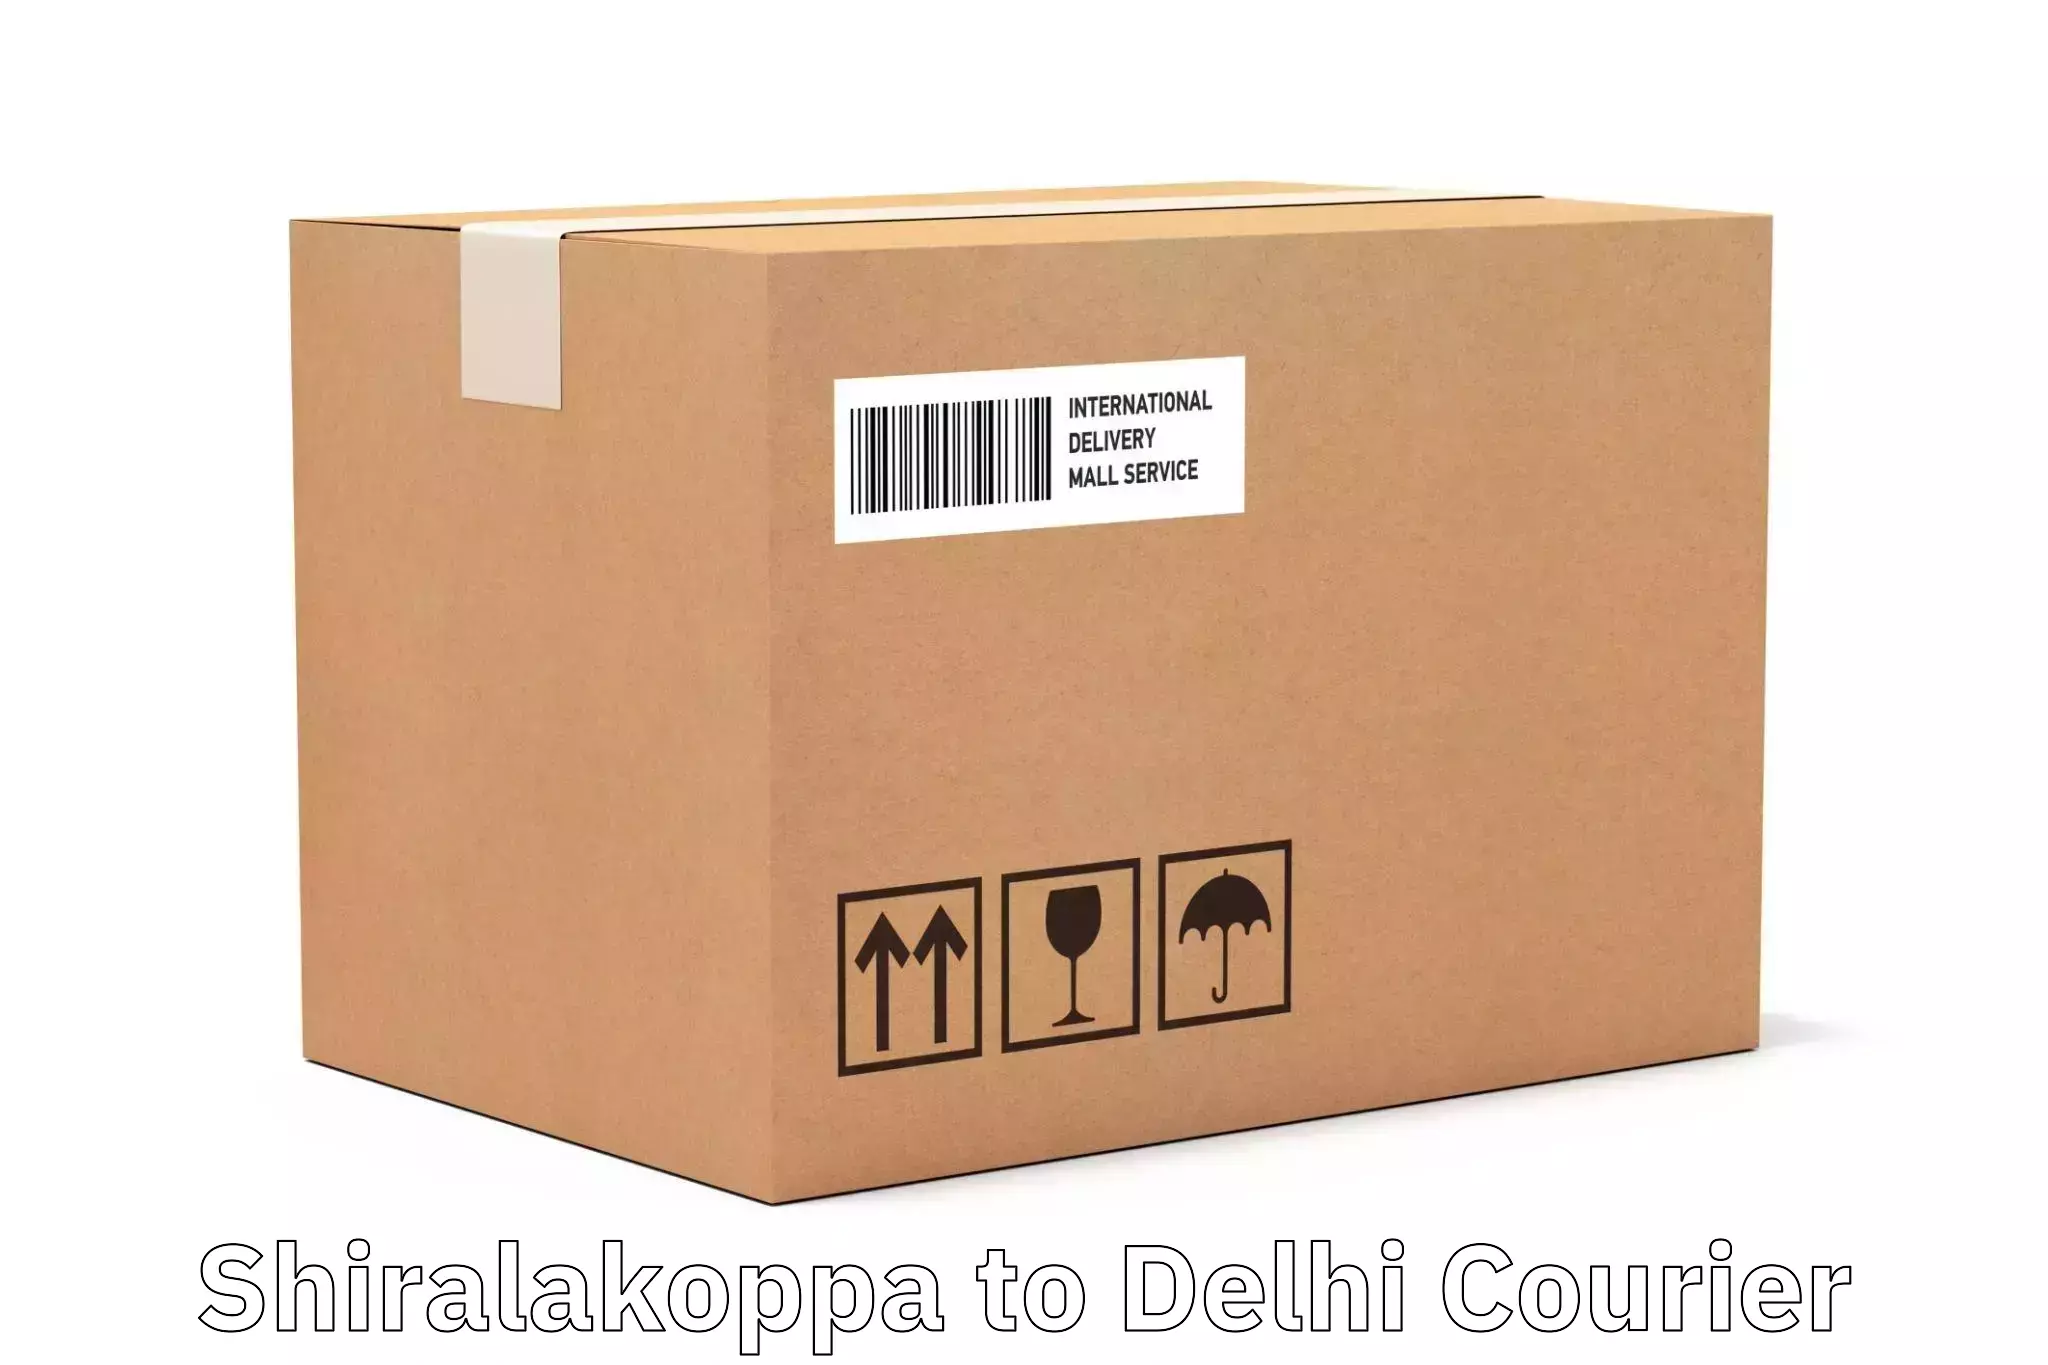 Personal parcel delivery in Shiralakoppa to University of Delhi